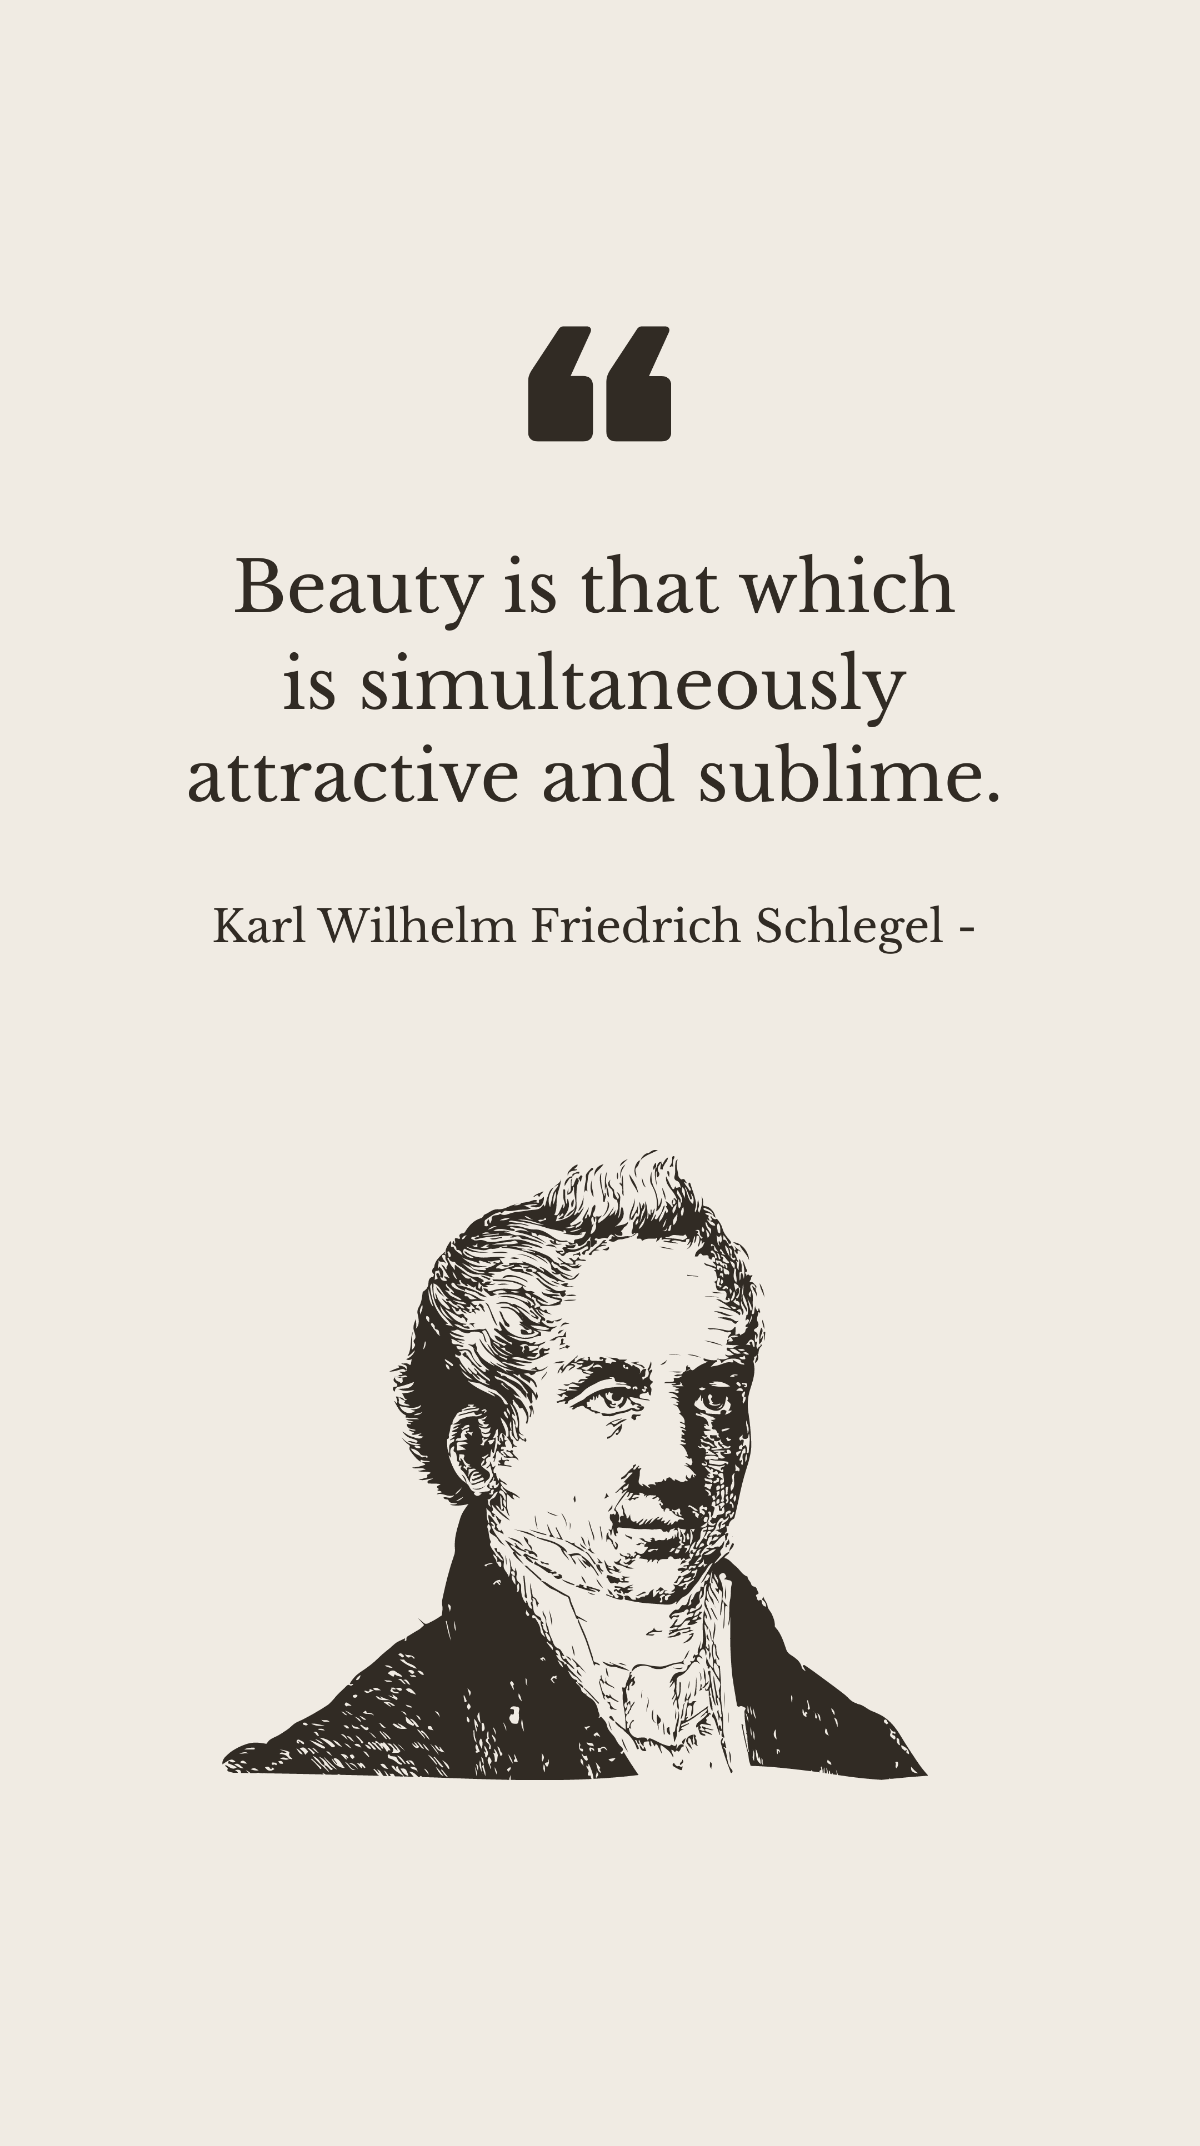 Karl Wilhelm Friedrich Schlegel - Beauty is that which is simultaneously attractive and sublime. Template